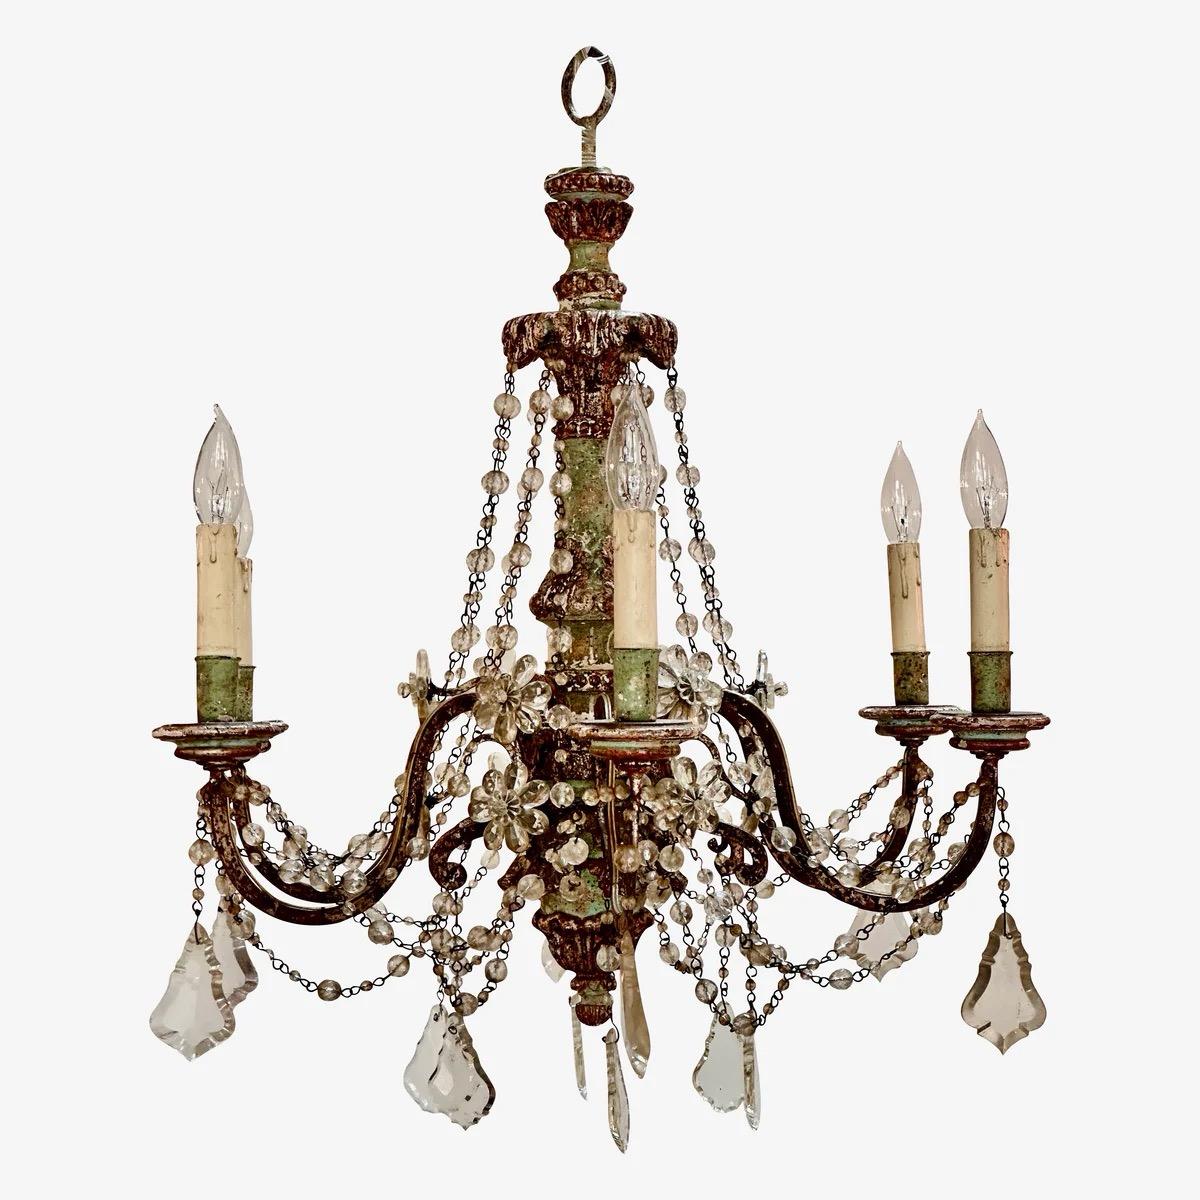 19th Century French or possibly Italian 6-arm Chandelier, the carved and gilded, green polychrome central piece supporting metal arms. Newly wired.
